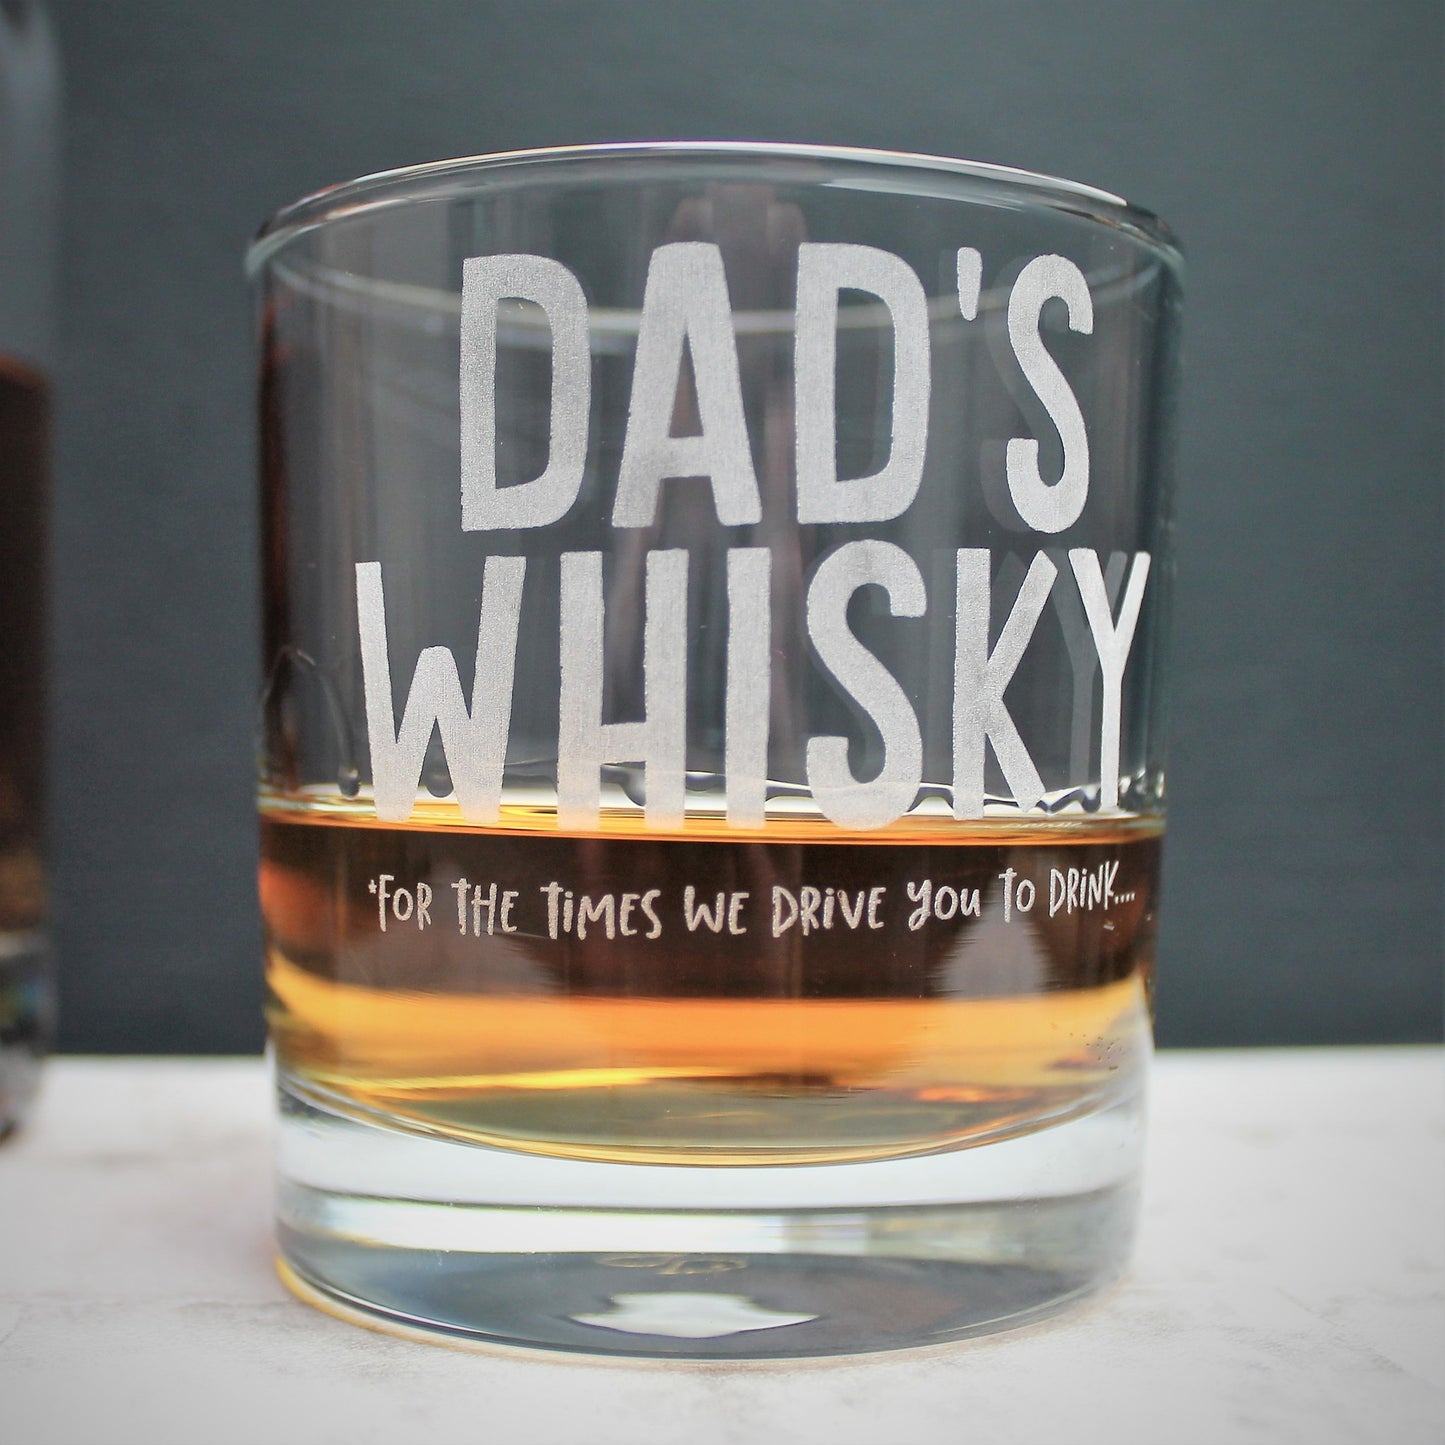 whisky loving dad gift - glass tumbler with engraved funny text 